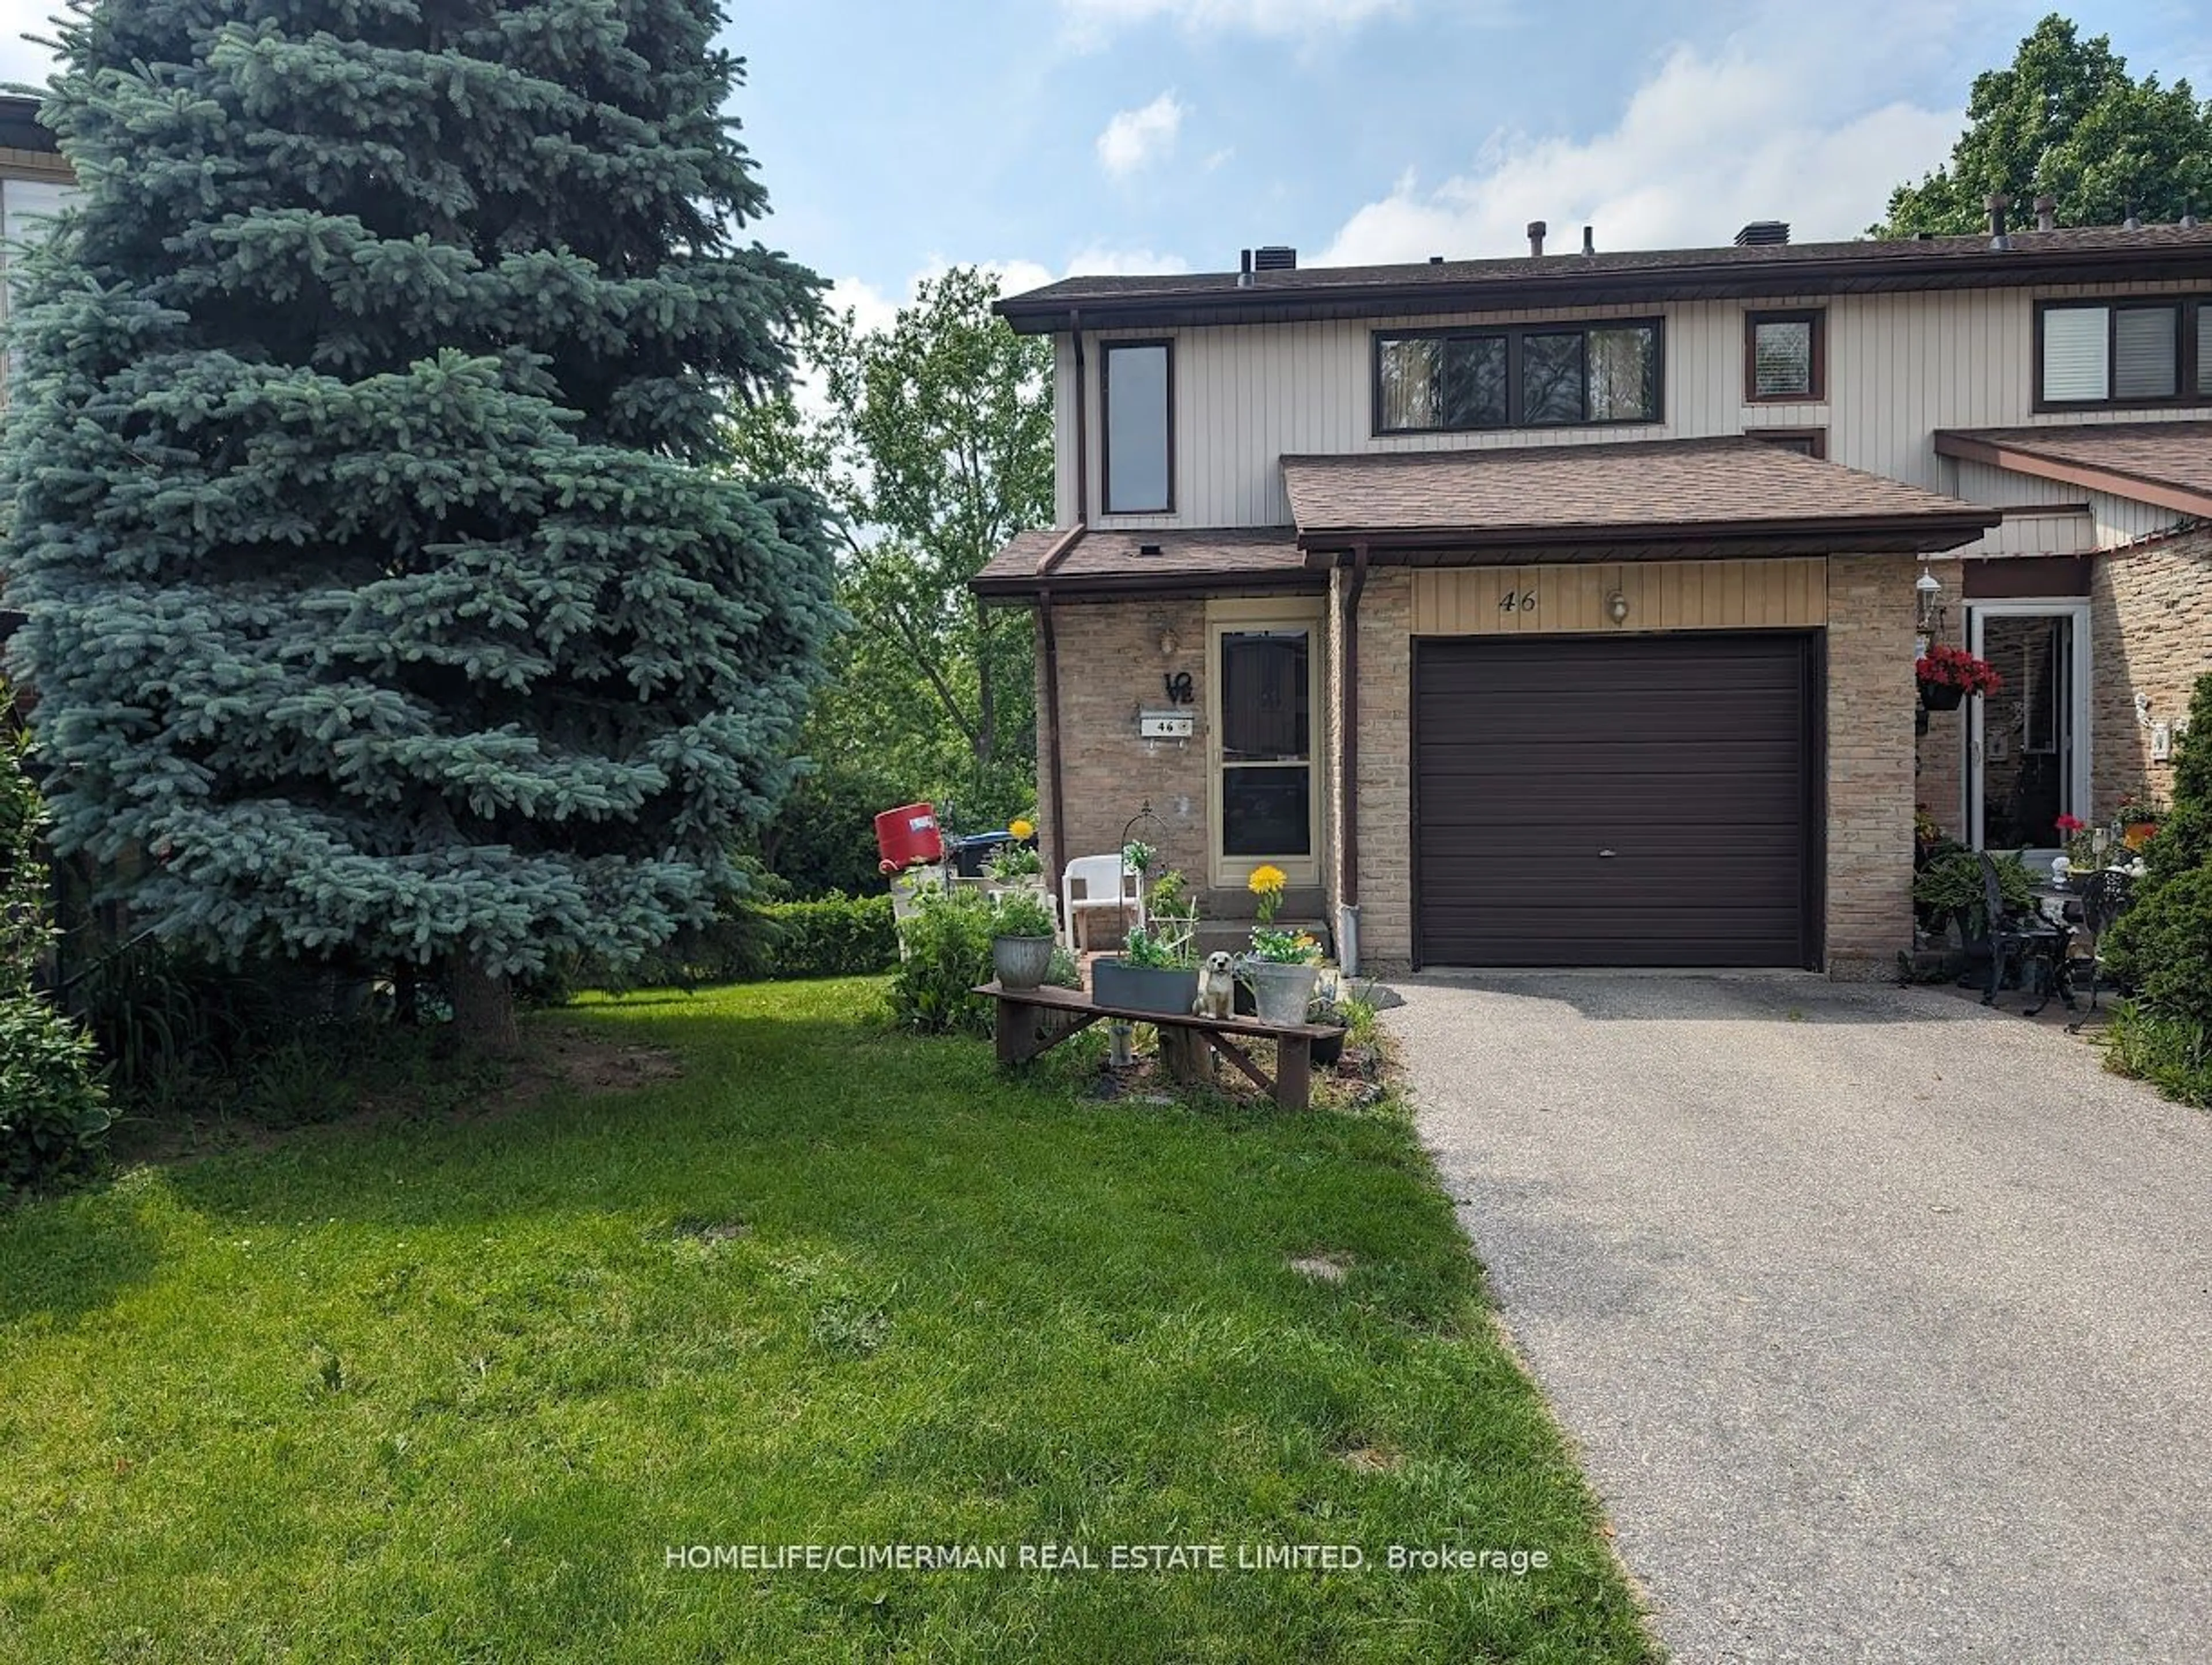 Frontside or backside of a home for 46 Foster Cres #46, Brampton Ontario L6V 3M7